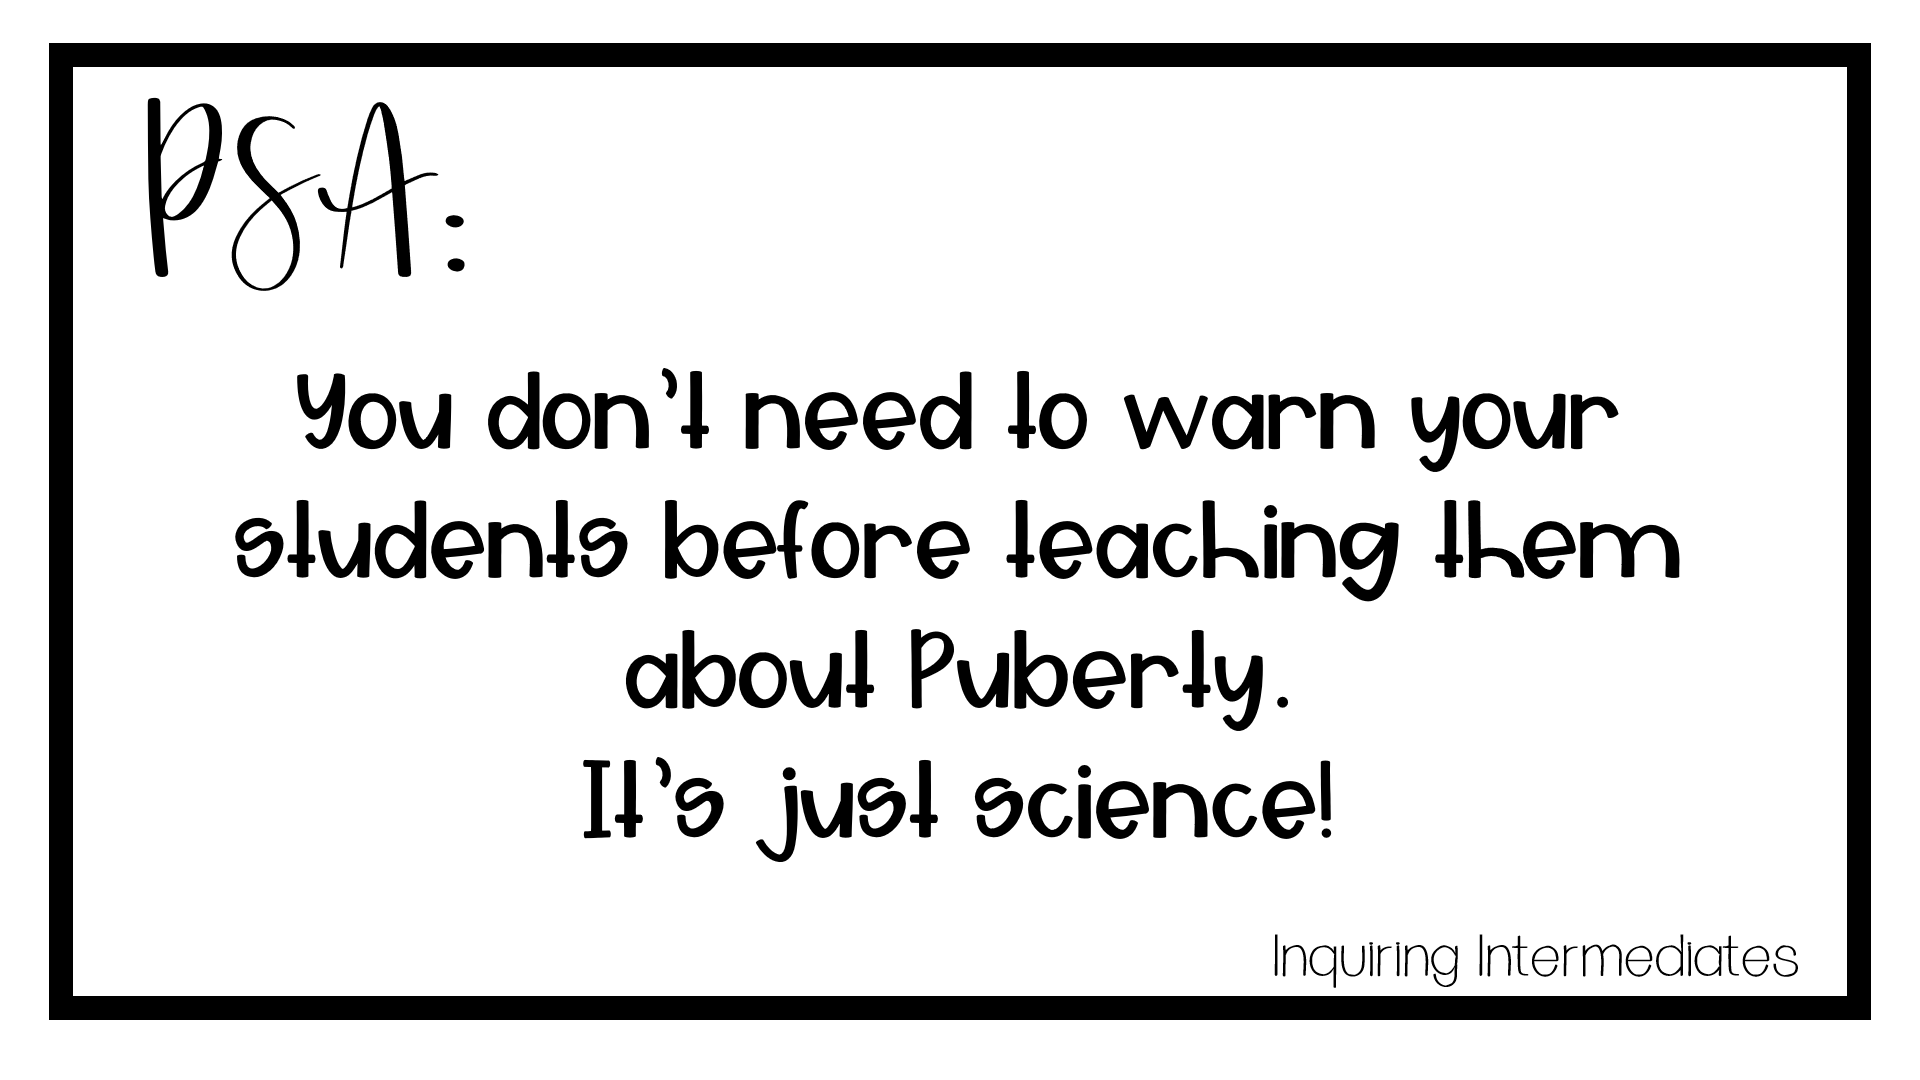 PSA: You don't need to warn your students before teaching them about puberty. It's just science!